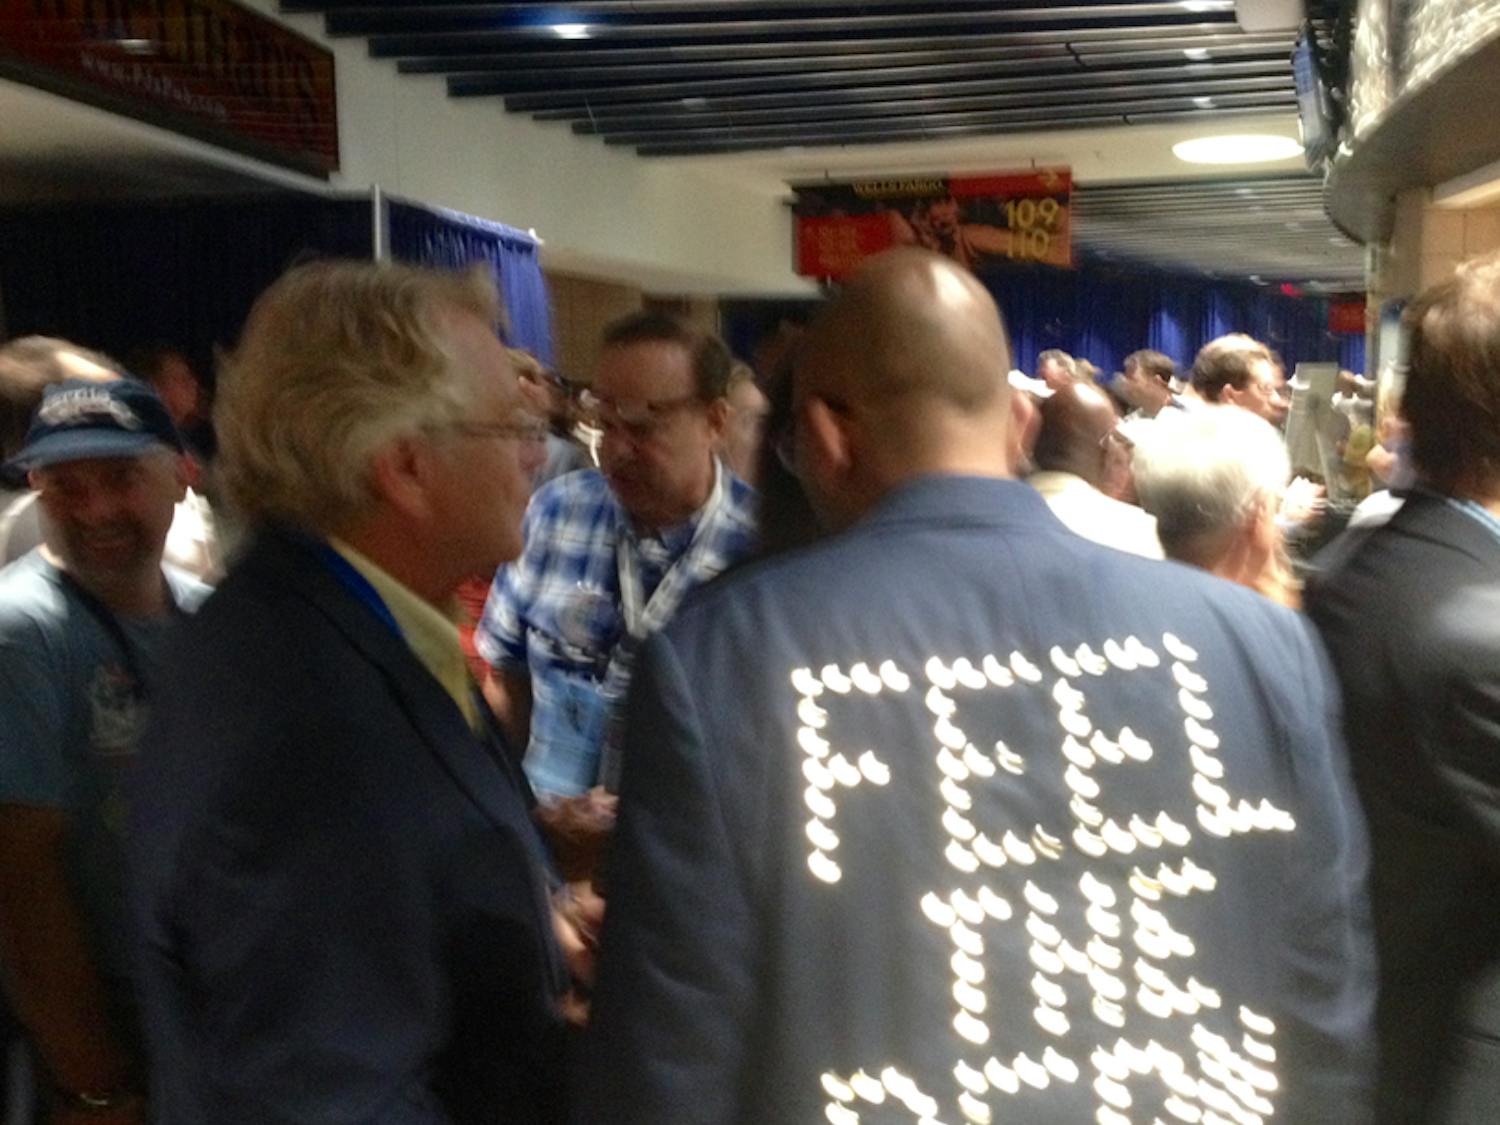 Talk show host and former Cincinnati Mayor Jerry Springer chats with a Bernie Sanders delegate on the first day of the Democratic National Convention in Philadelphia on July 25, 2016.